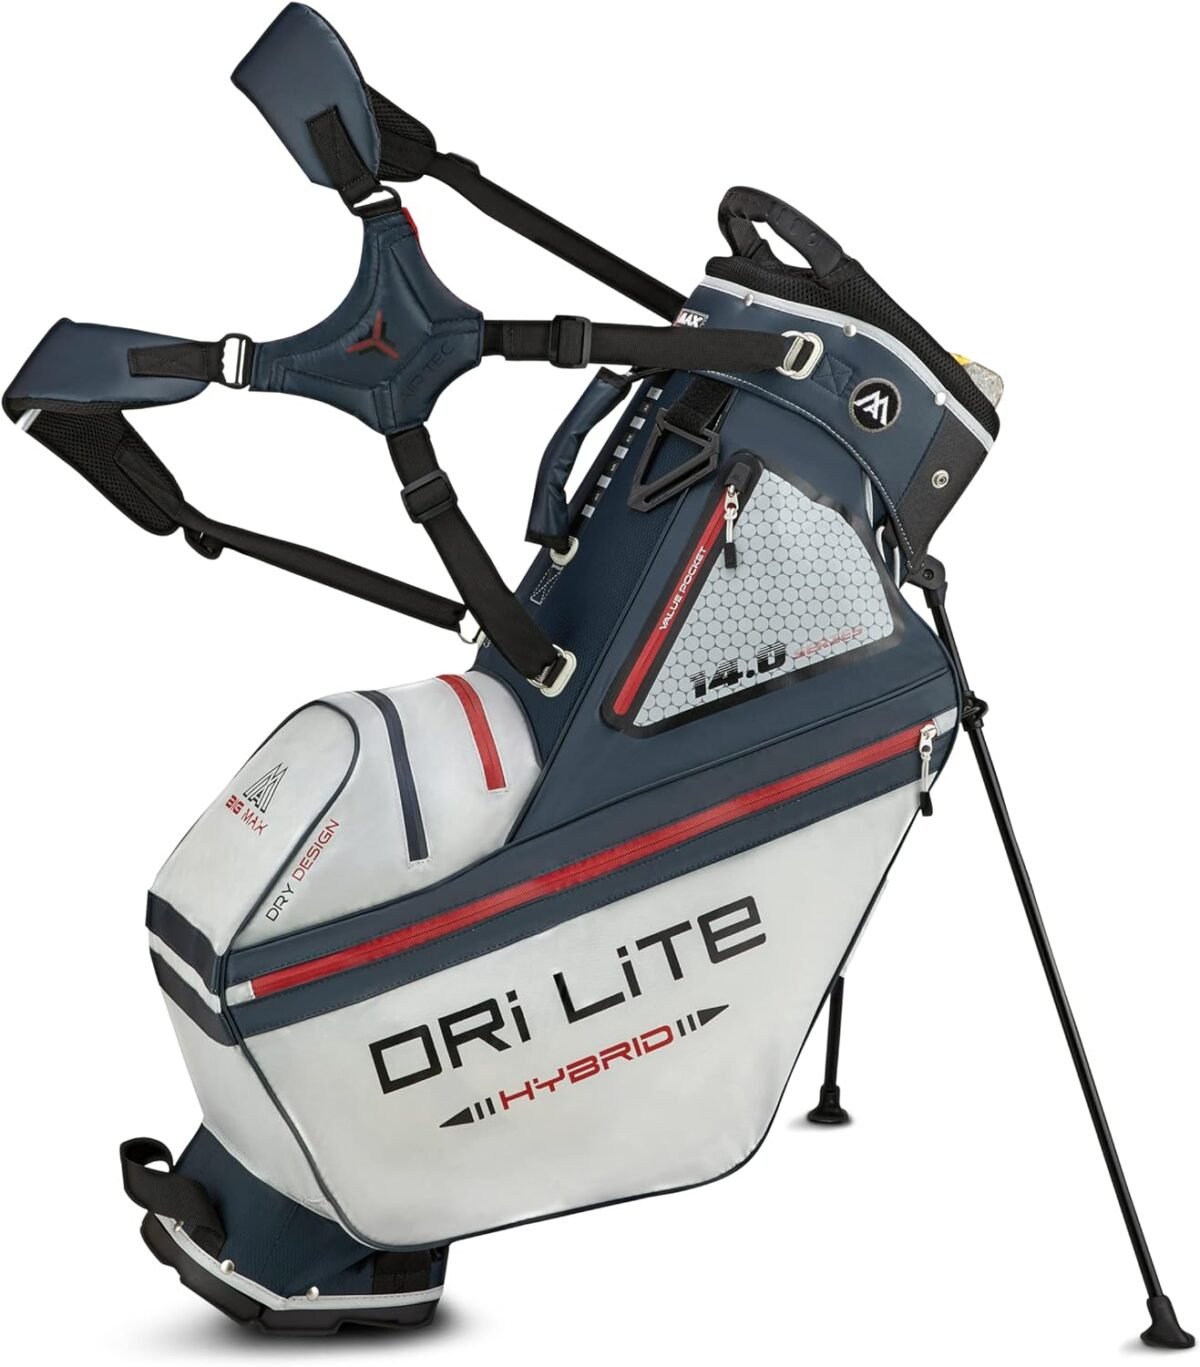 5 Golf Stand Bags: Comparing Durability, Lightweight Design, and Storage